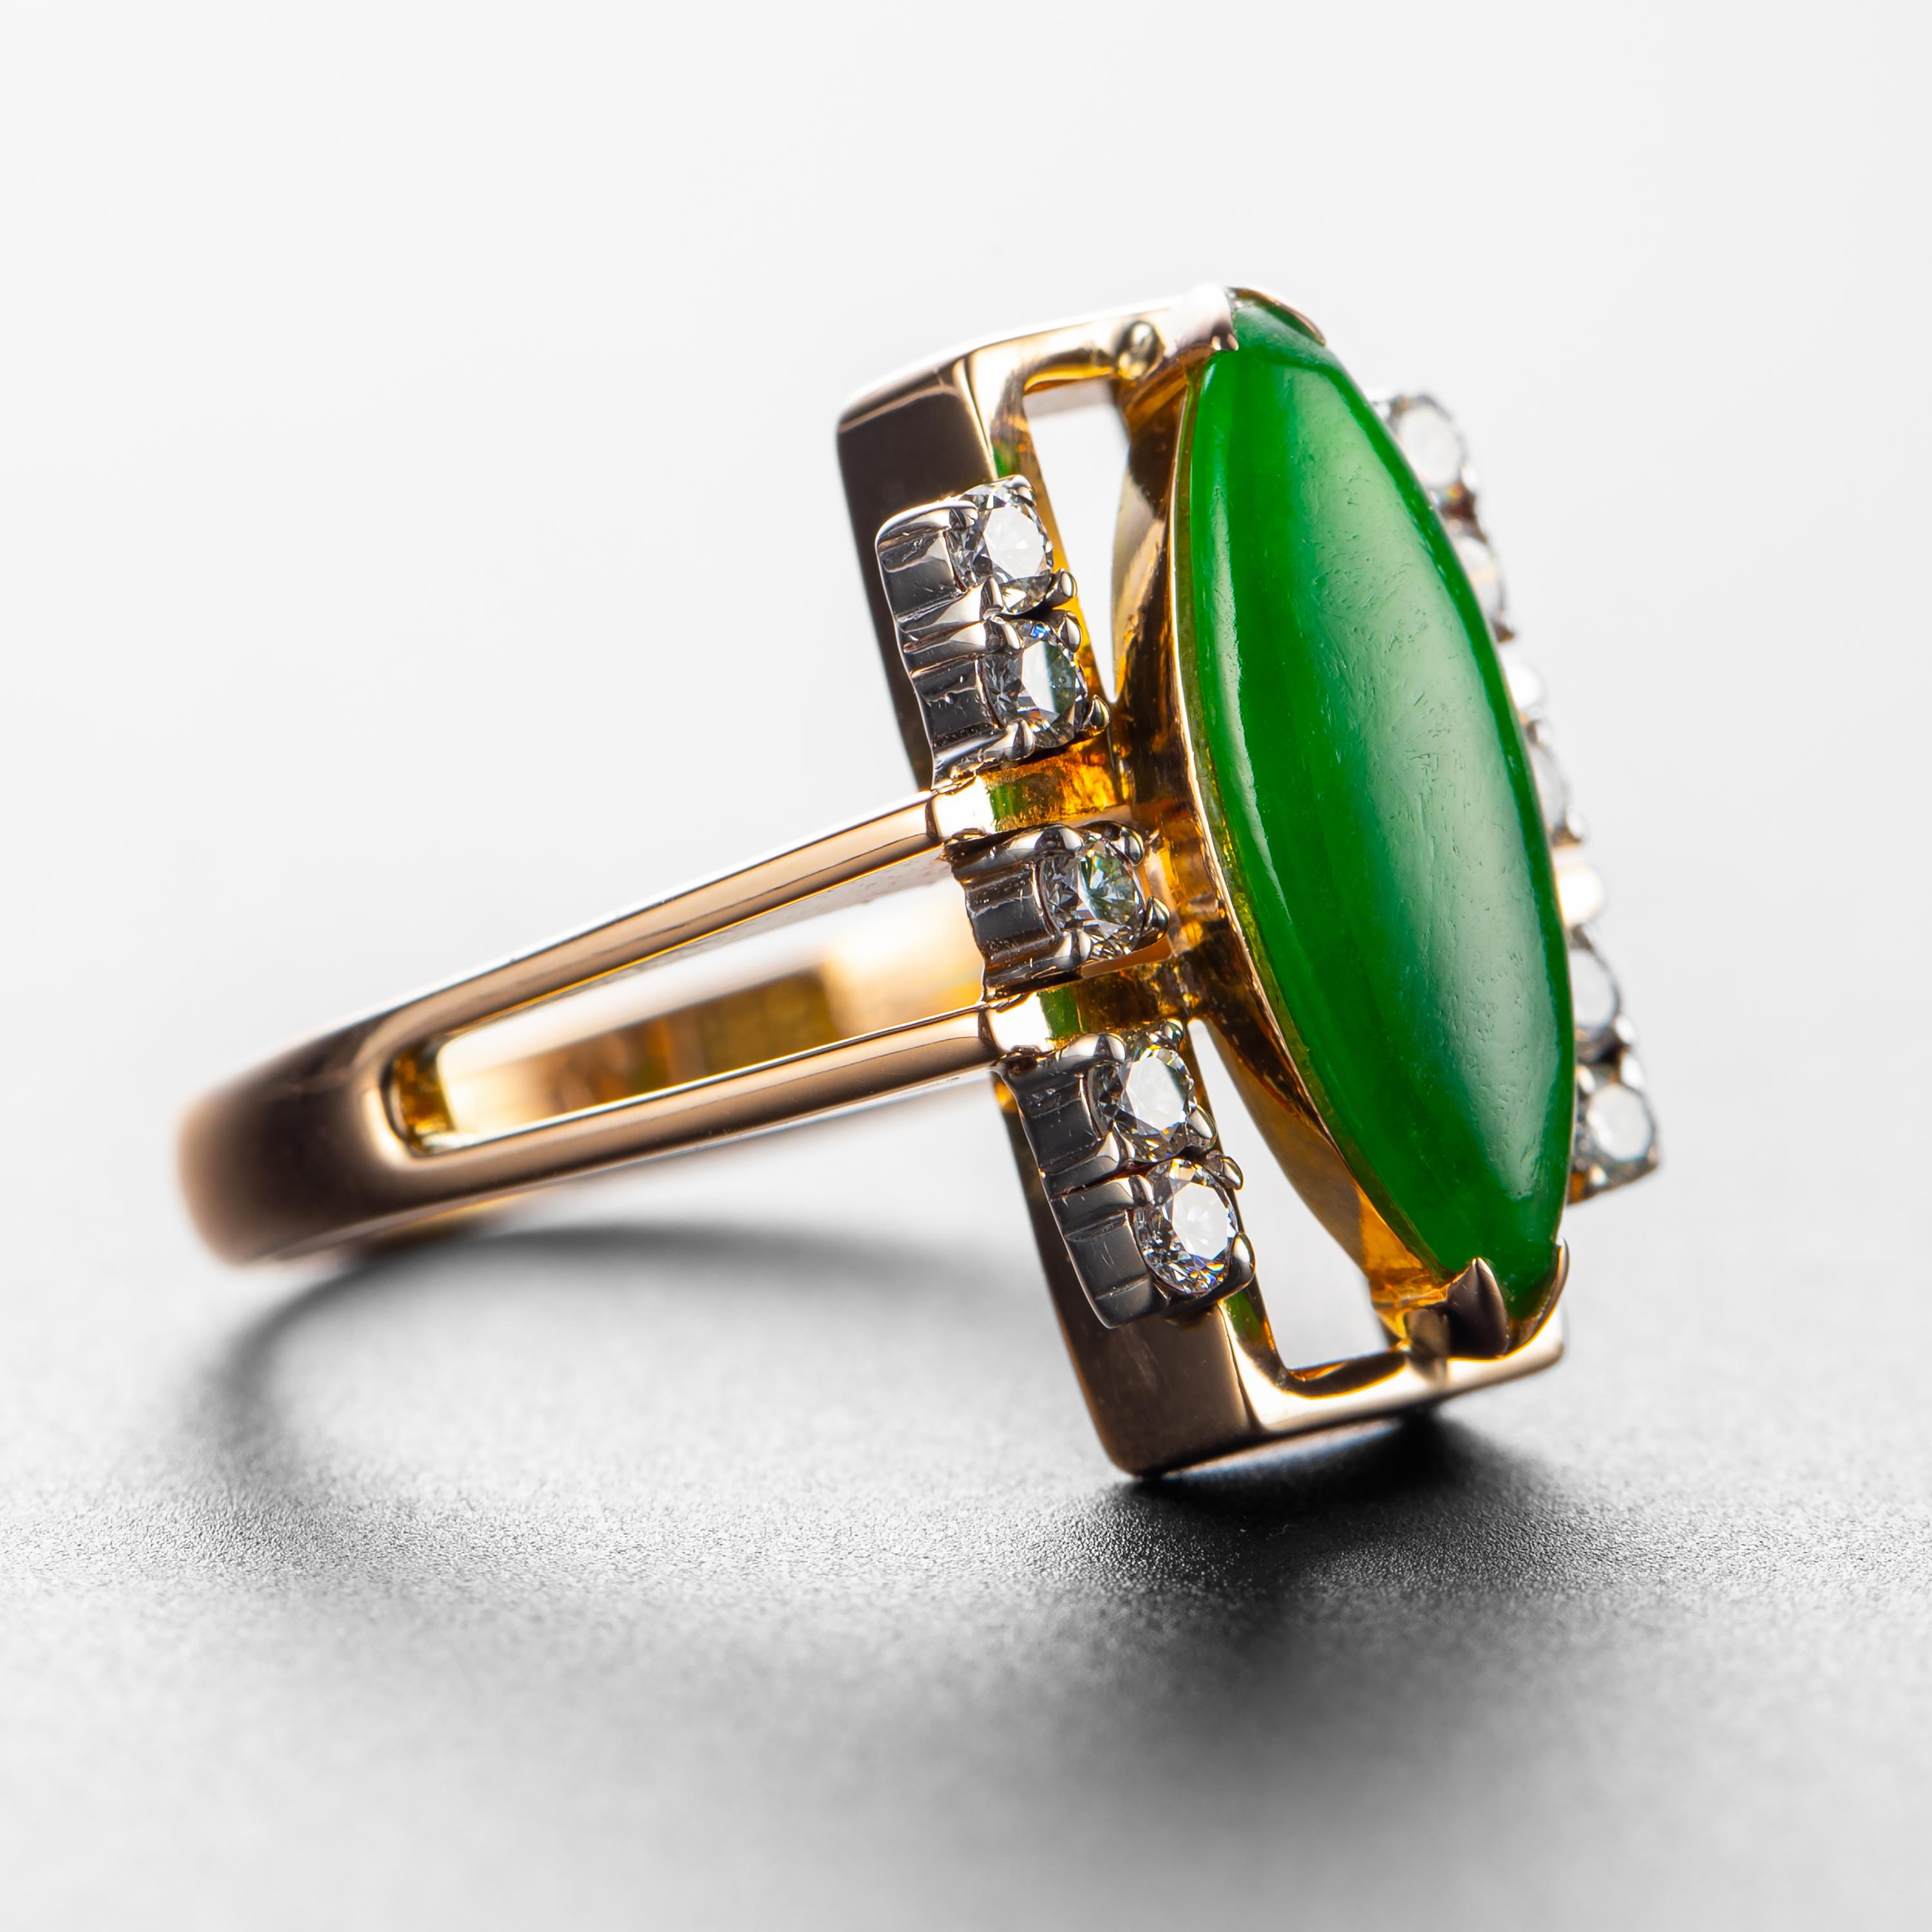 A magnificent fine green jadeite jade navette-shaped cabochon that is certified by Stone Group Labs to be natural and untreated jadeite from Burma creates a dramatic, vivid impact within this architectural retro rose gold setting. Five bright white